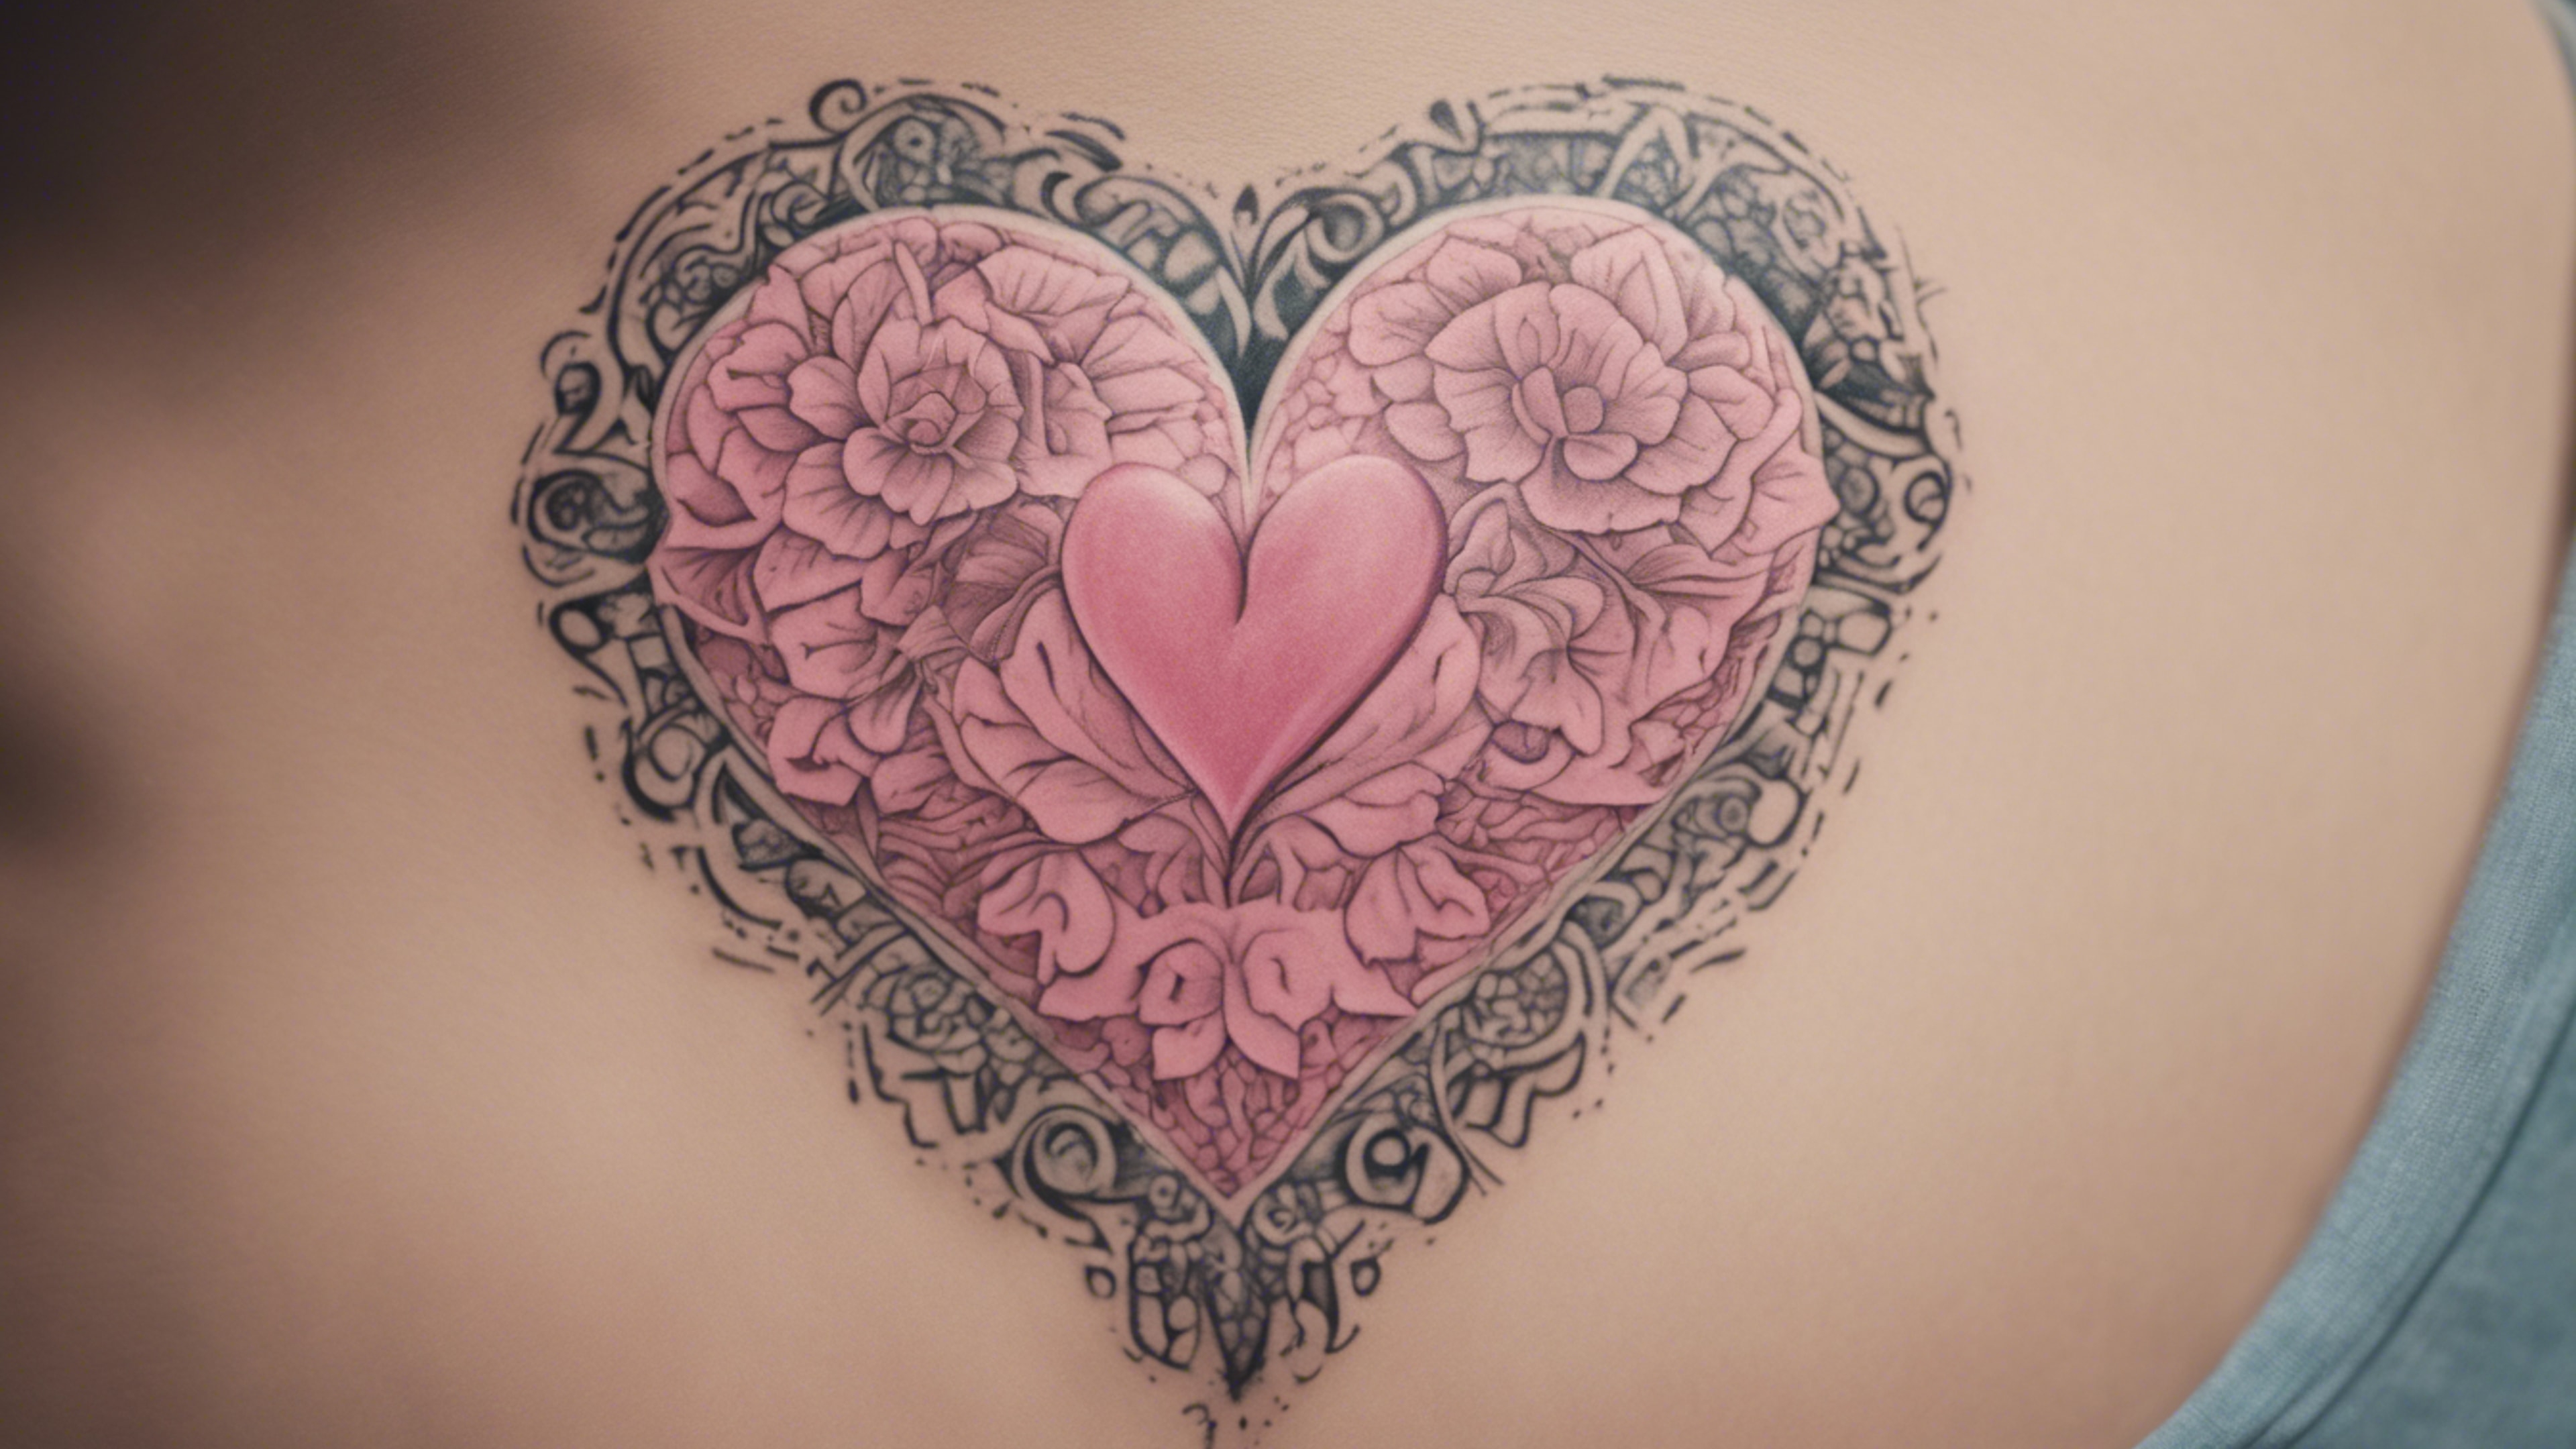 A small pink heart shaped tattoo embellished with intricate floral patterns. Tapeta[dd23c5855ab44f40b2fe]